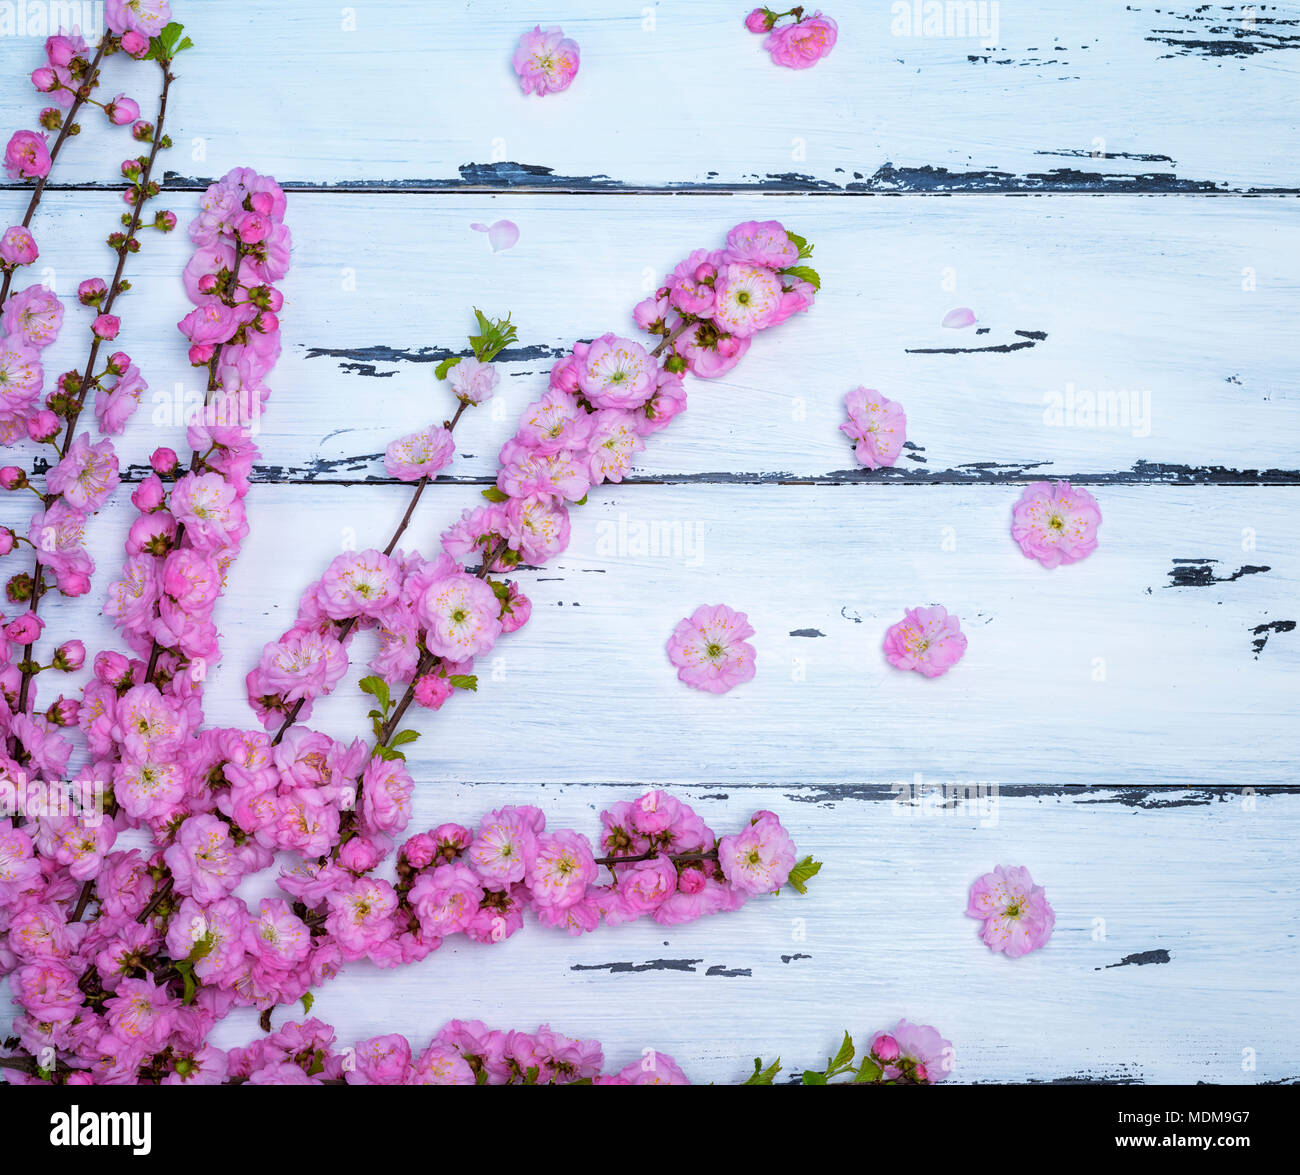 branches with pink flowers Louiseania triloba on awhite wooden  background, empty space on the right Stock Photo